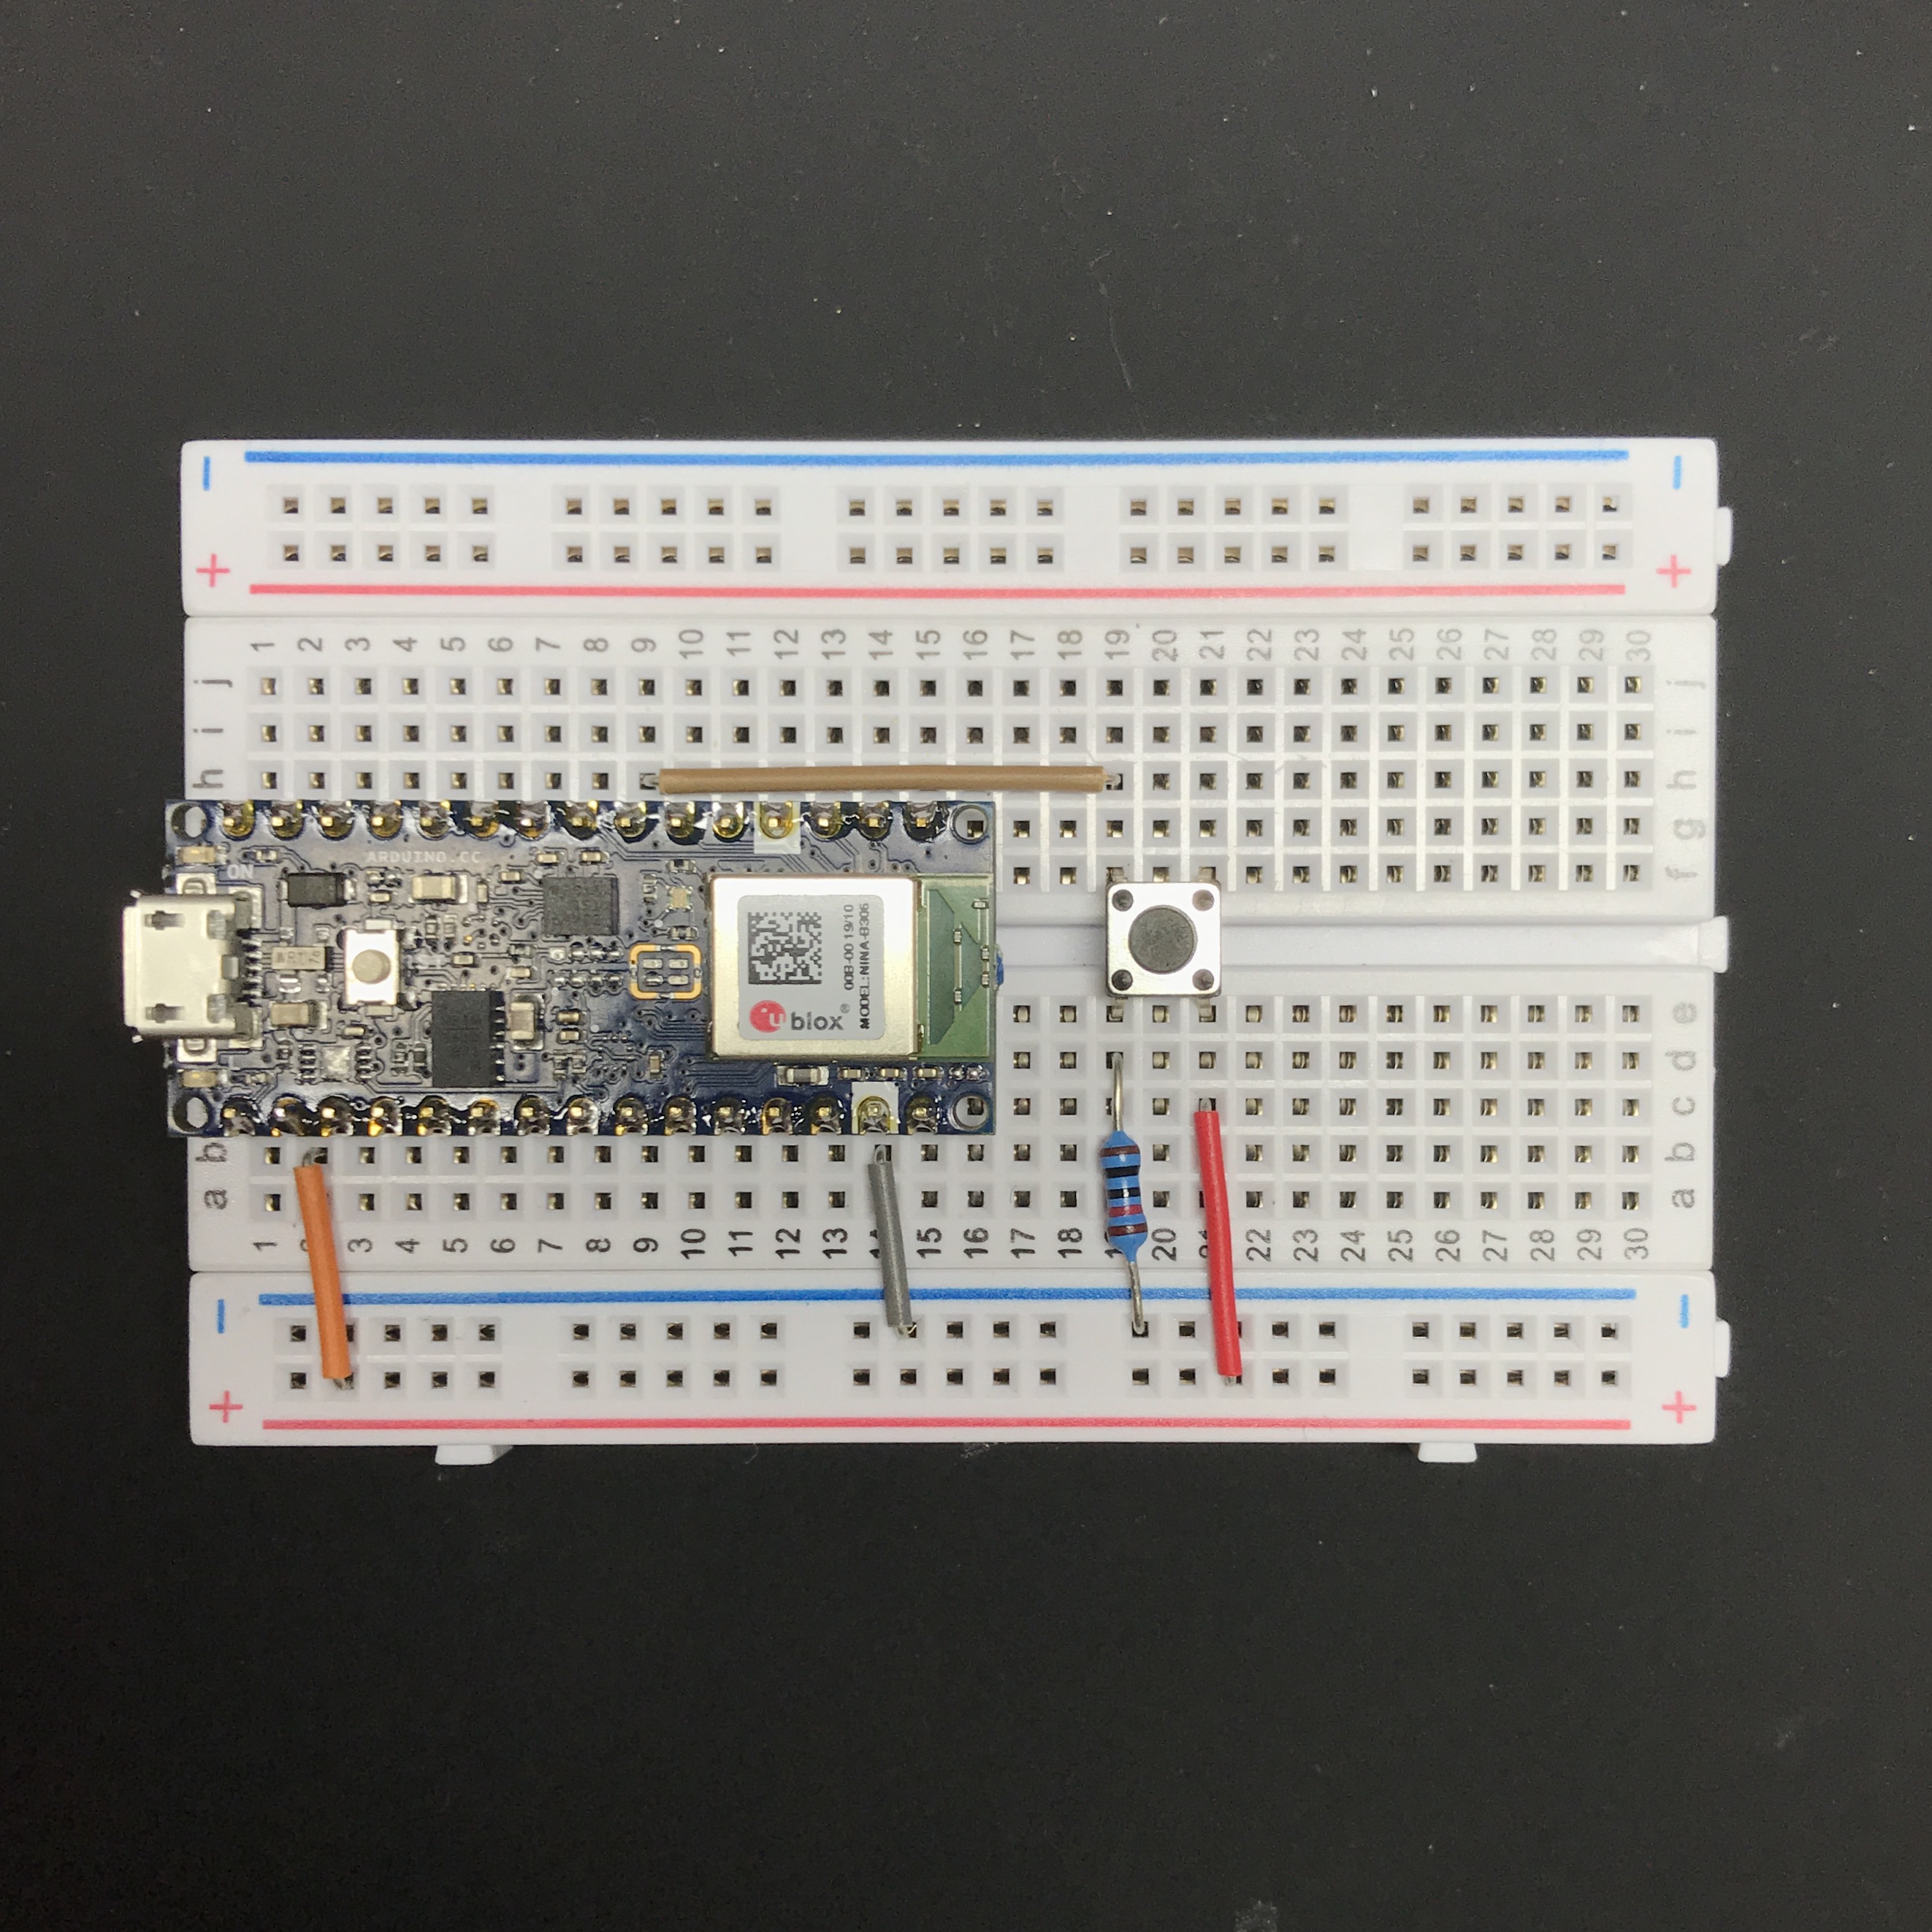 Getting Started With P5 Ble Js Using Arduino Nano 33 Ble Hackster Io